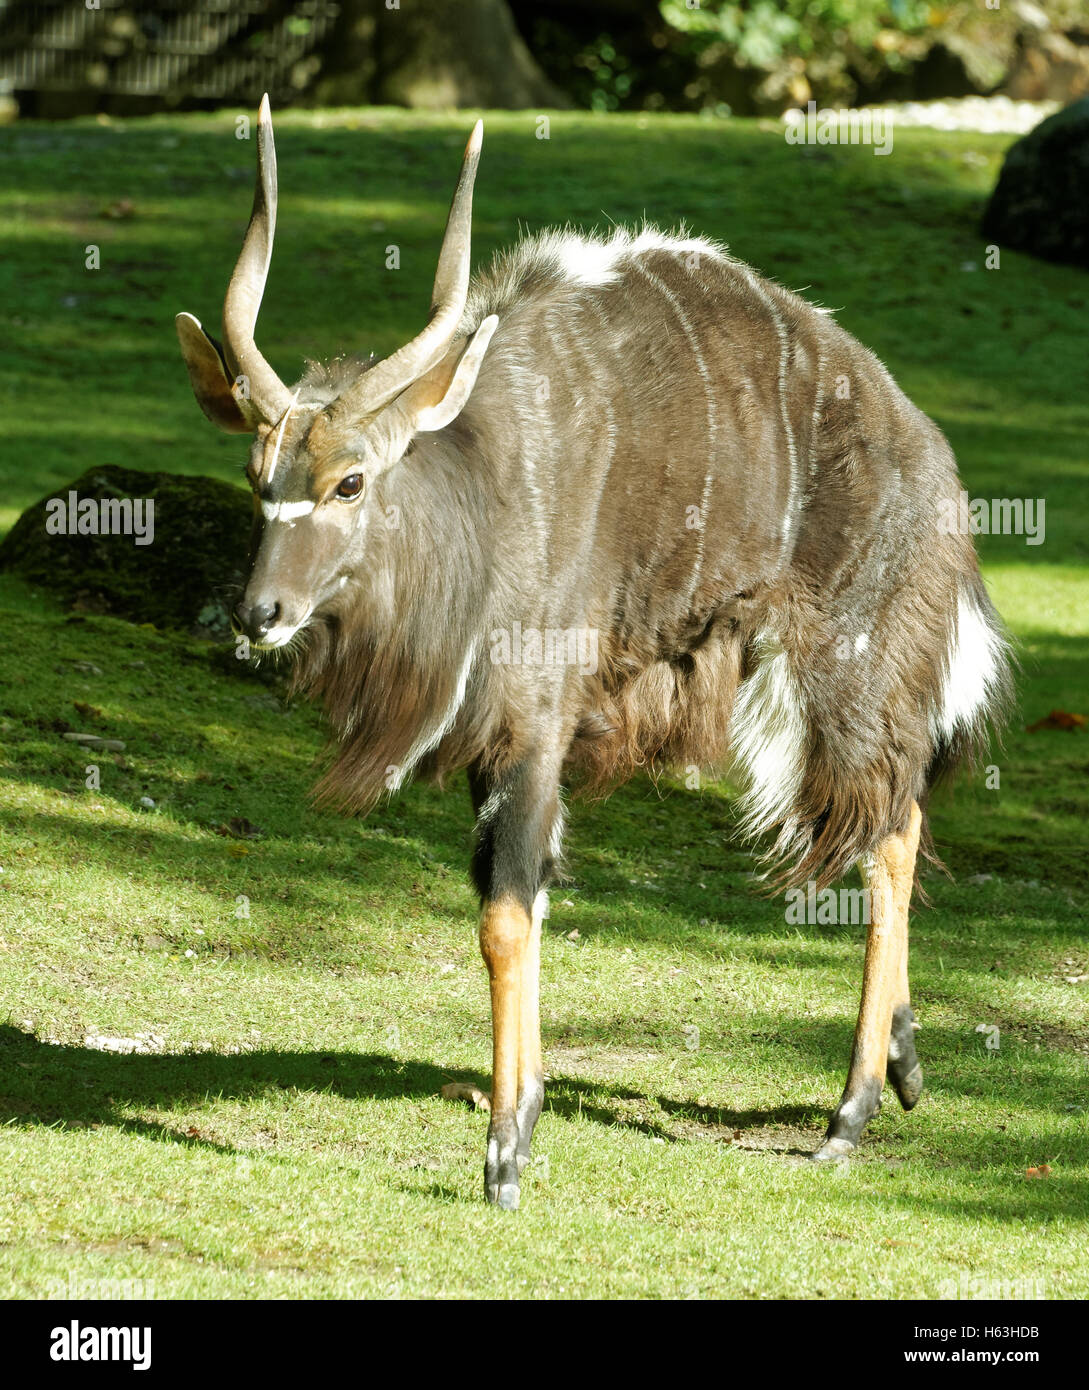 Nyala (Tragelaphus angasii), also called inyala is a spiral-horned antelope native to southern Africa. Stock Photo